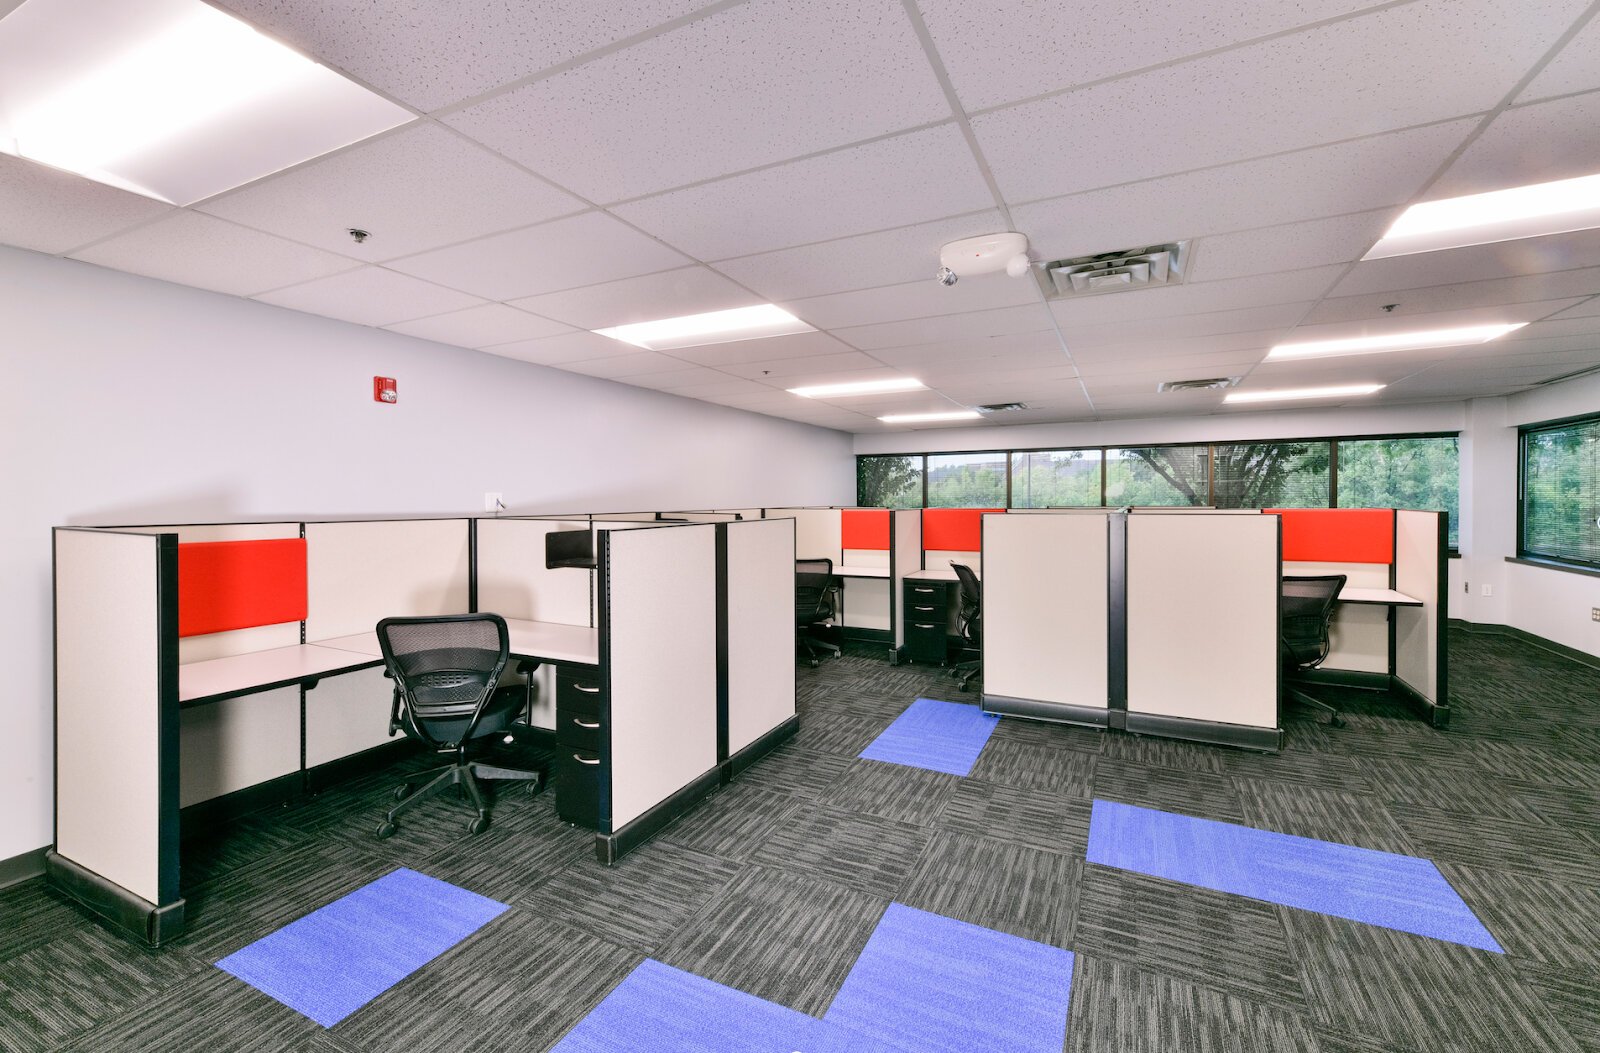 Oxford Instant Office floor plans range from a 130-square-foot single office to a larger 4,500-square-foot space for 20-25 people.